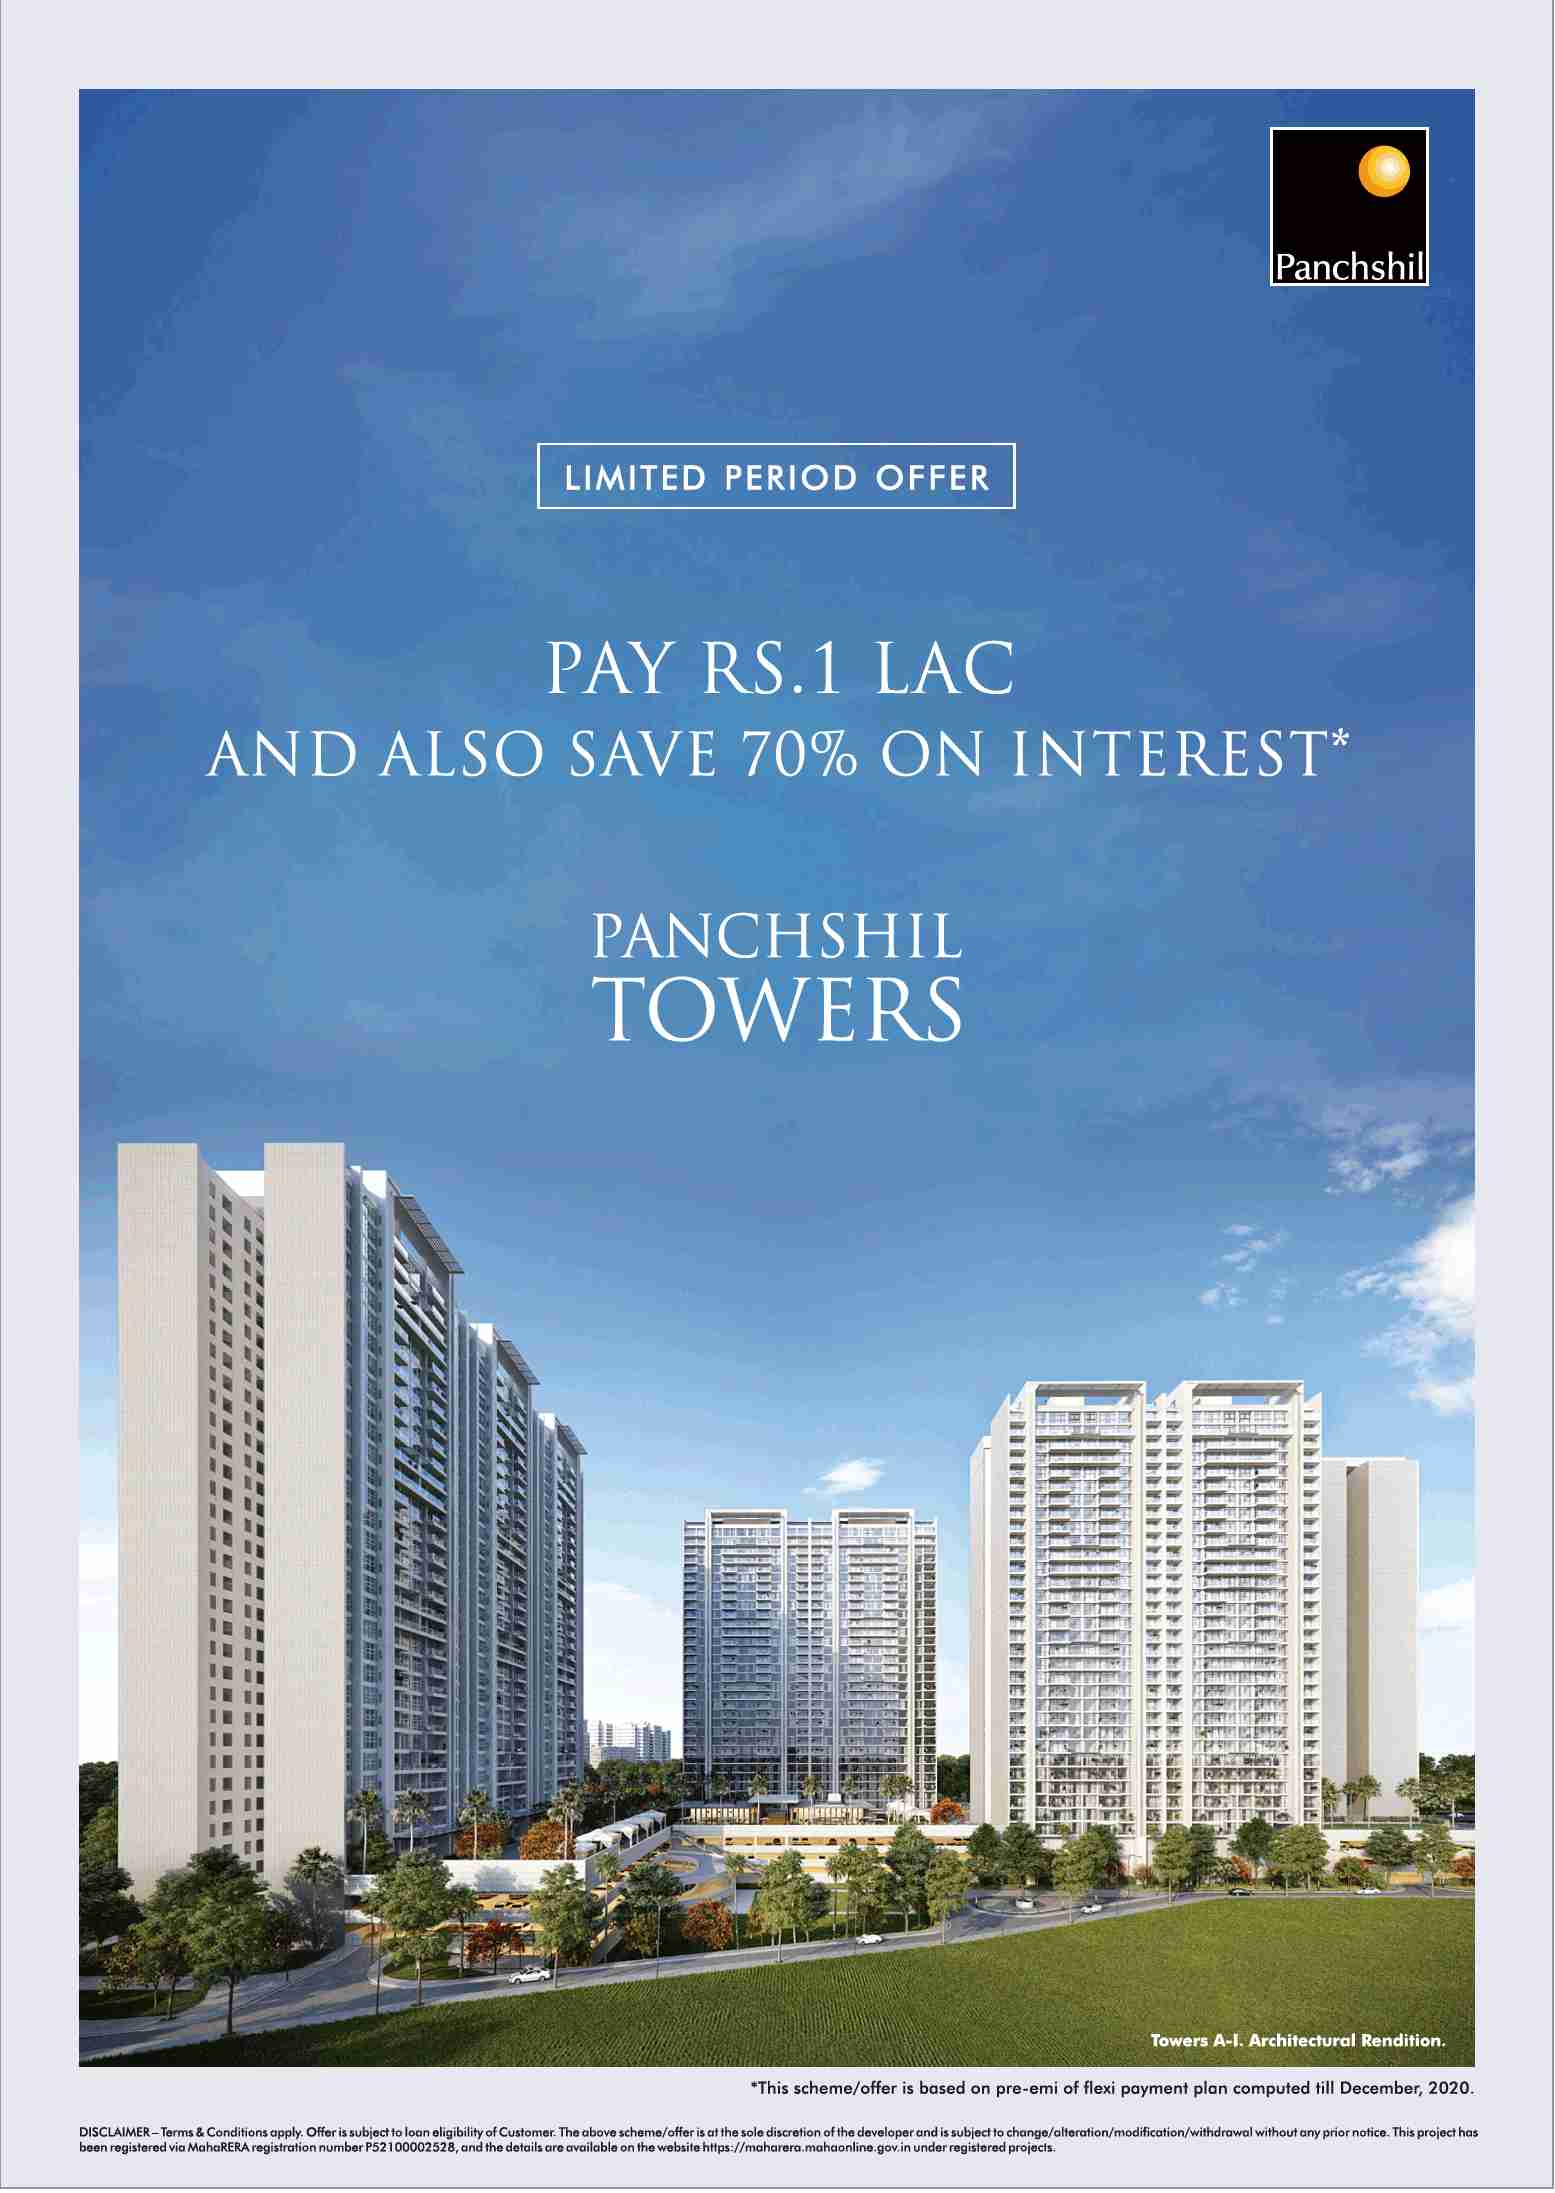 Pay Rs. 1 Lac and also save 70% on interest at Panchshil Towers in Pune